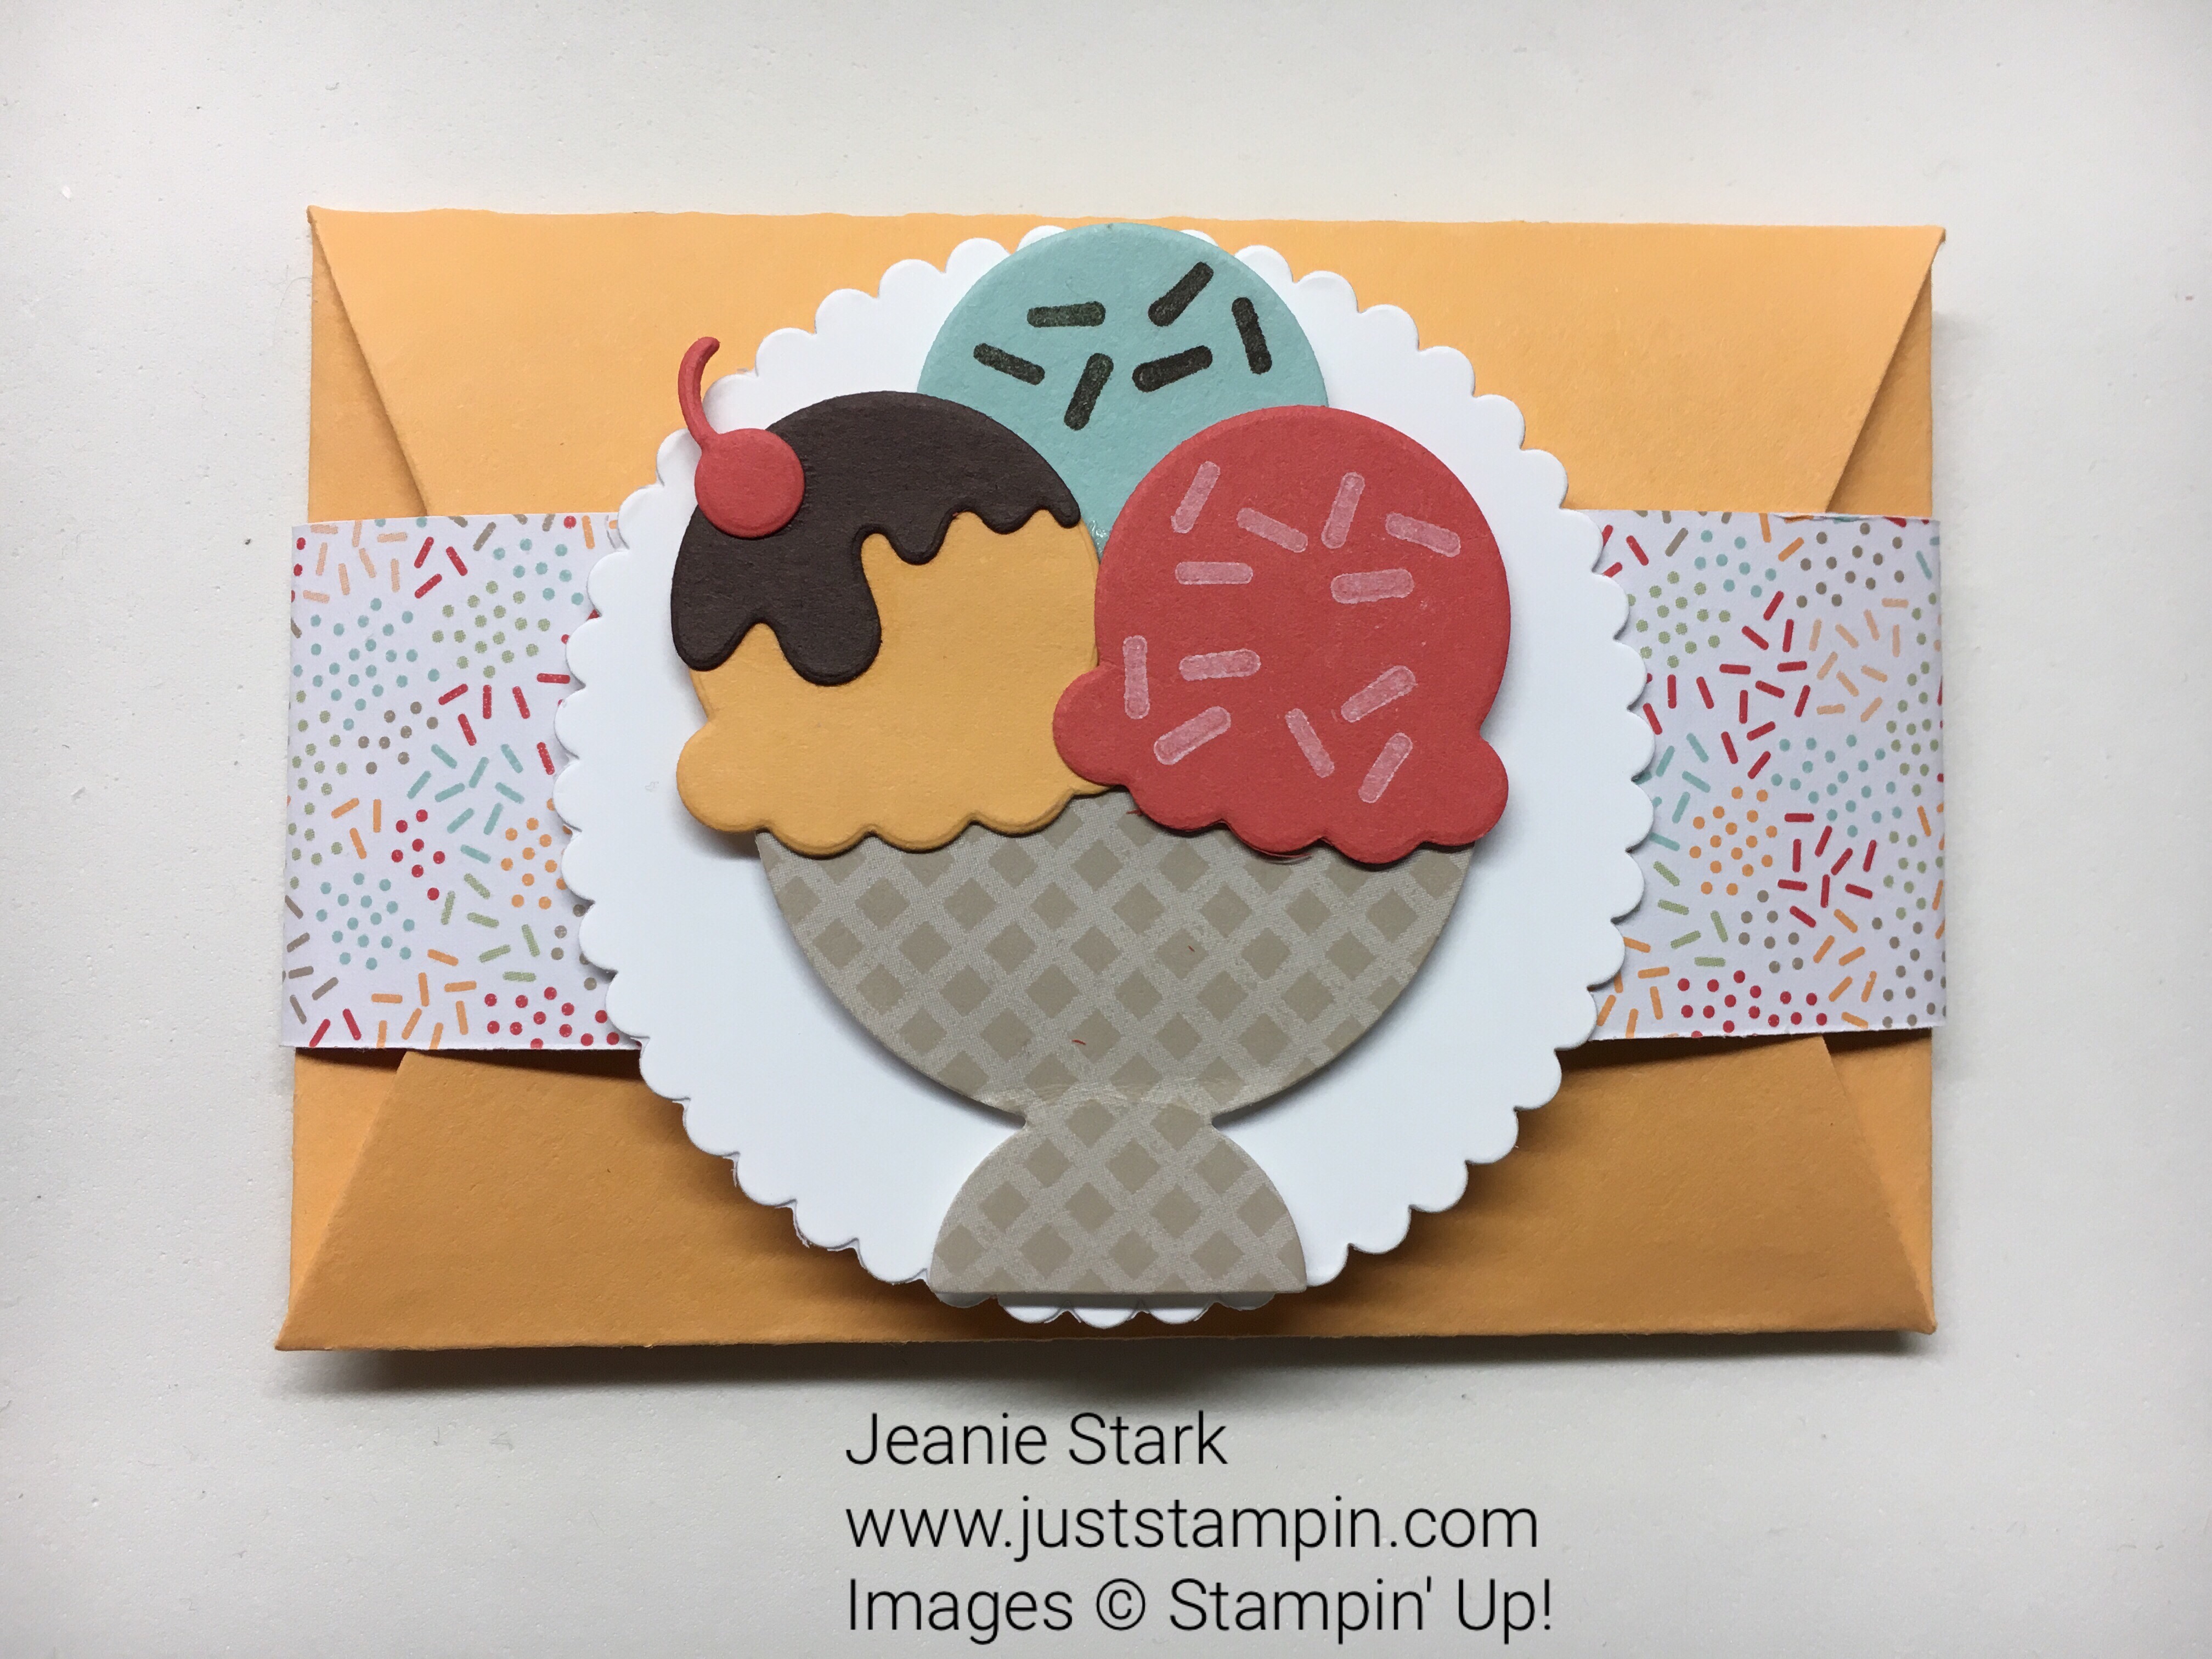 Stampin Up Cool Treats Gift Card Holder idea - Jeanie Stark StampinUp